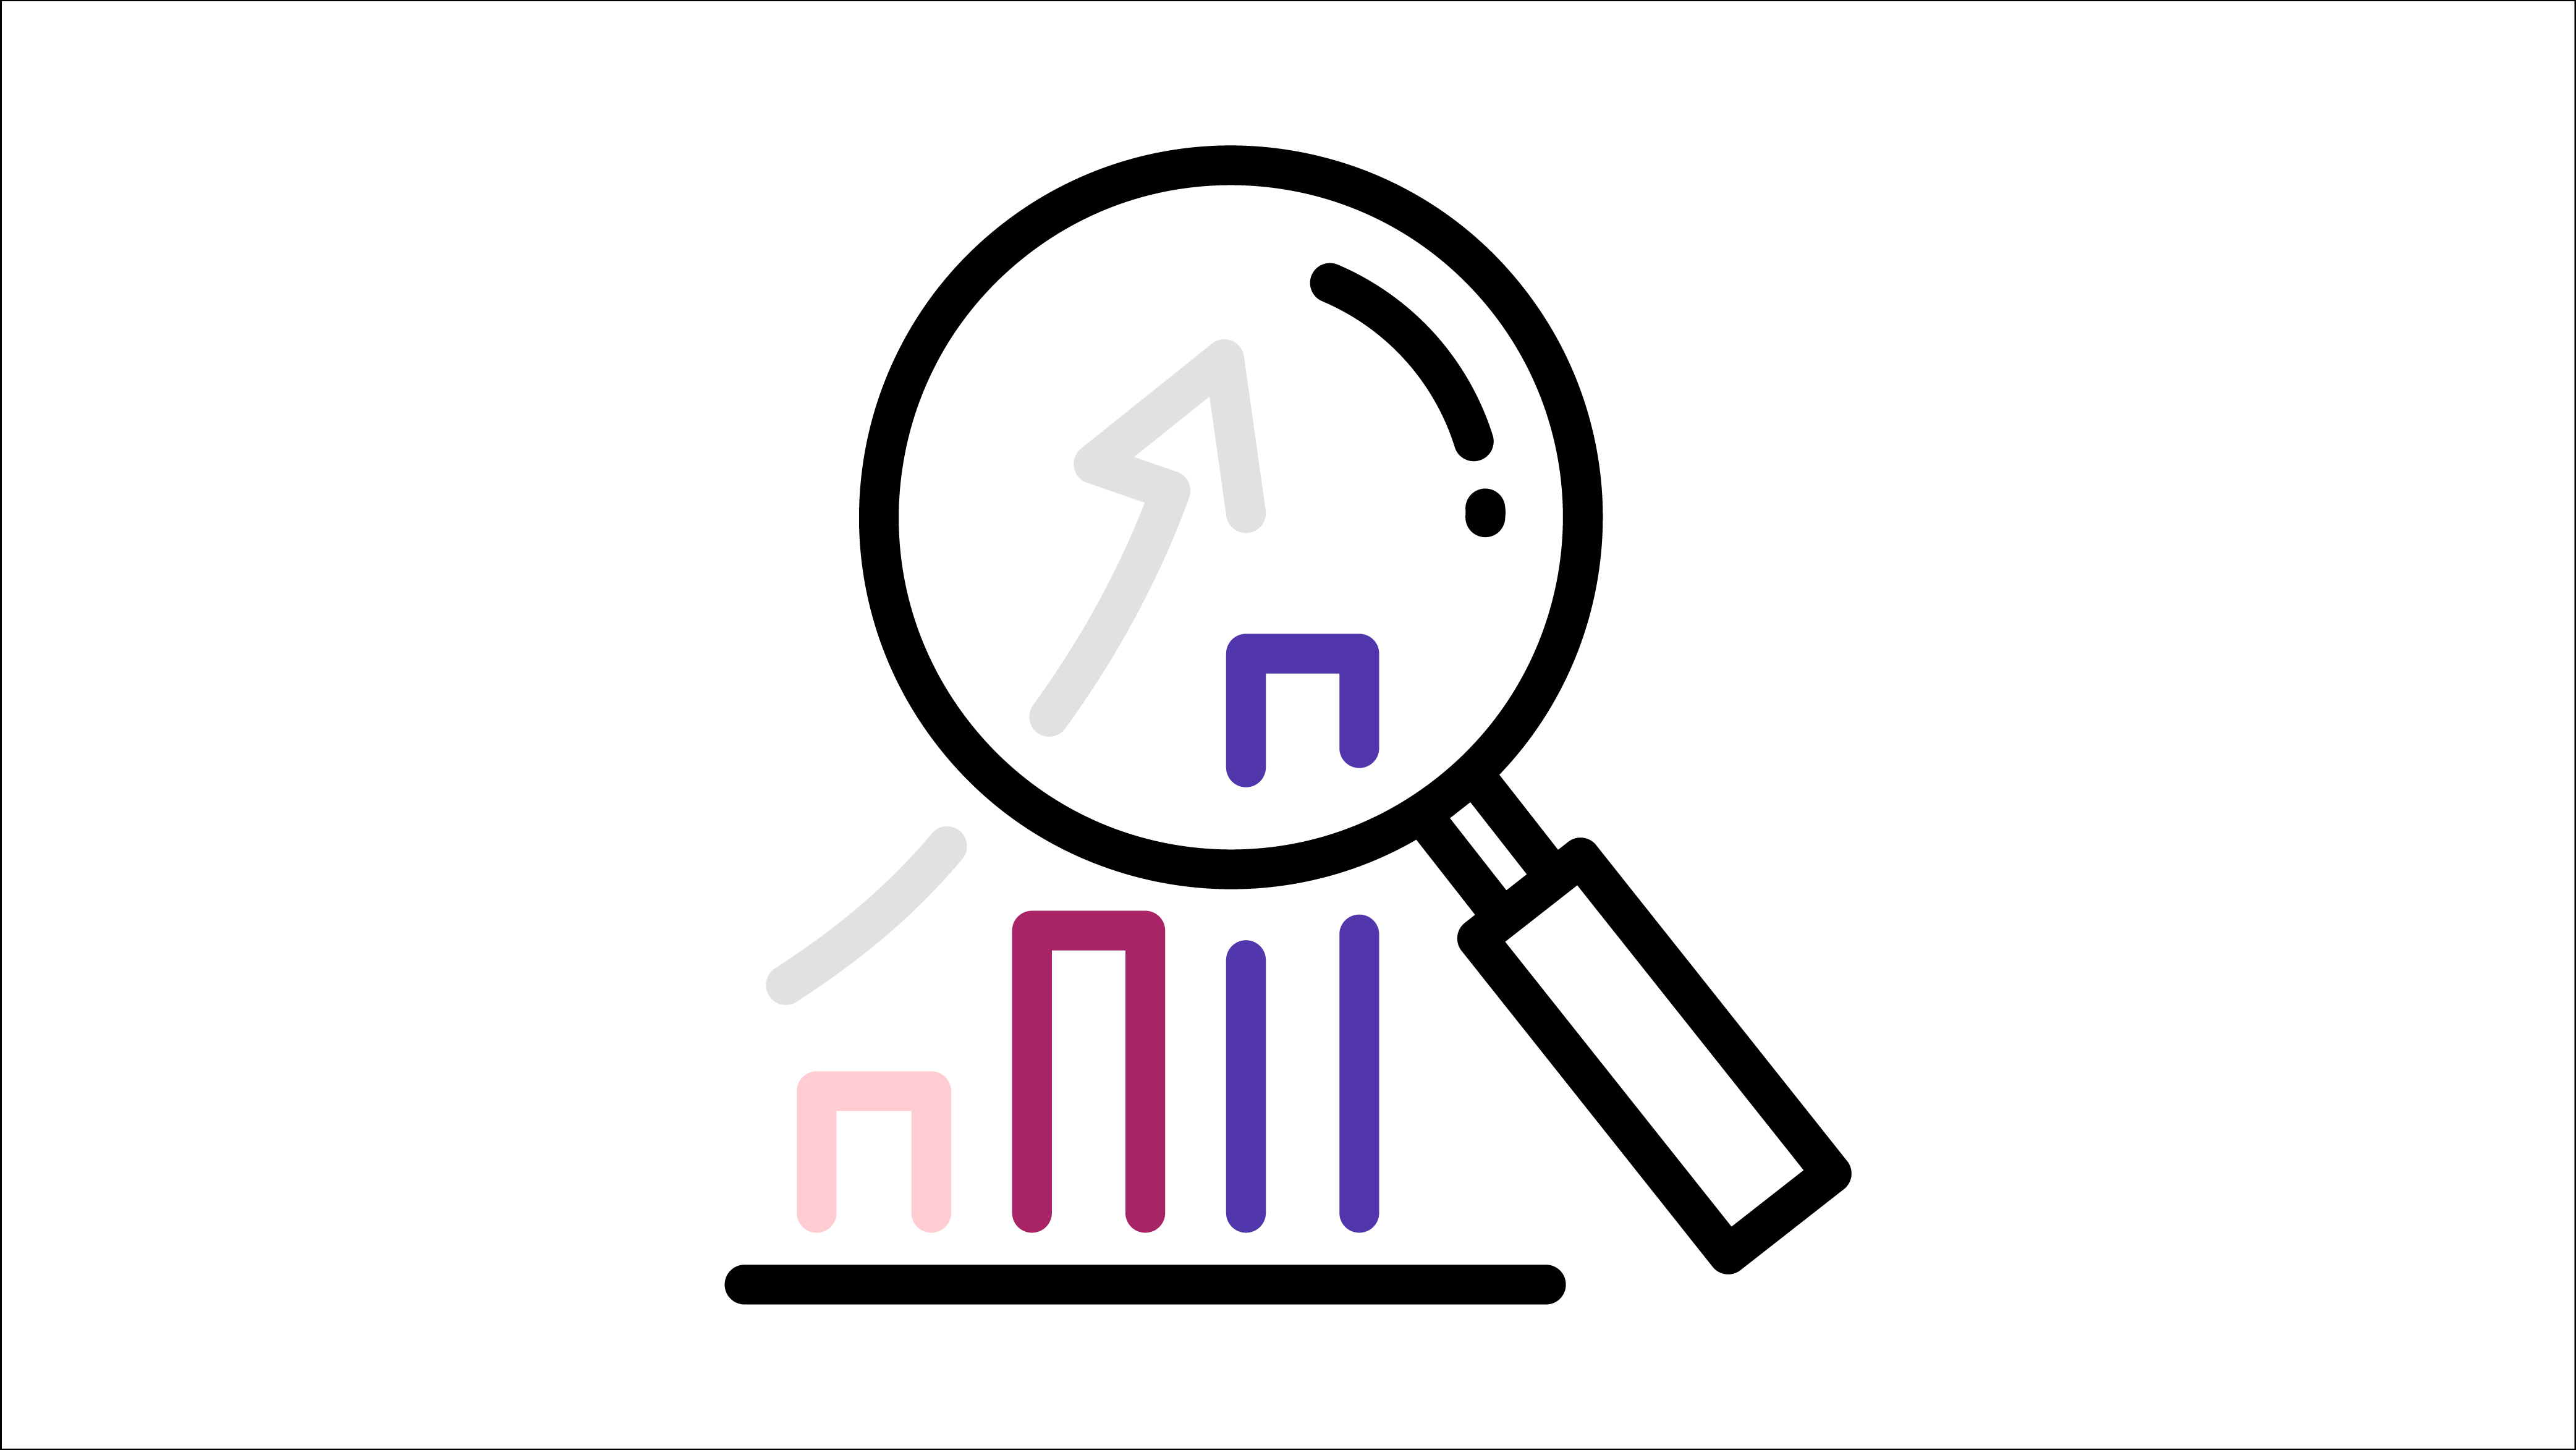 Magnifying glass and data icon